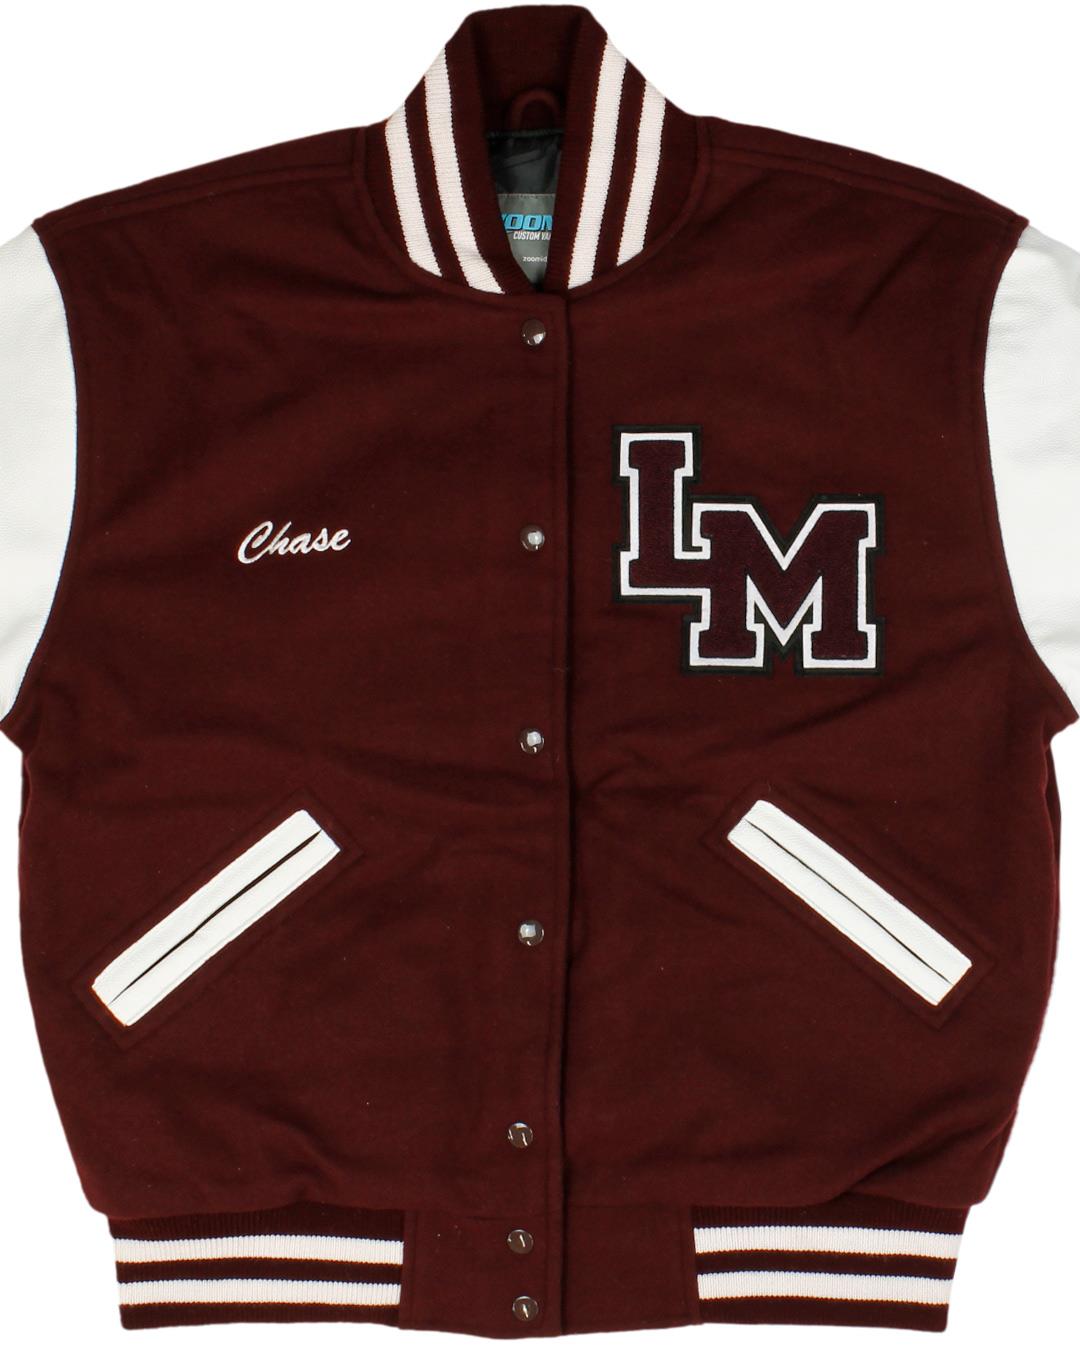 Lower Merion High School Letterman Jacket, Ardmore PA - Front